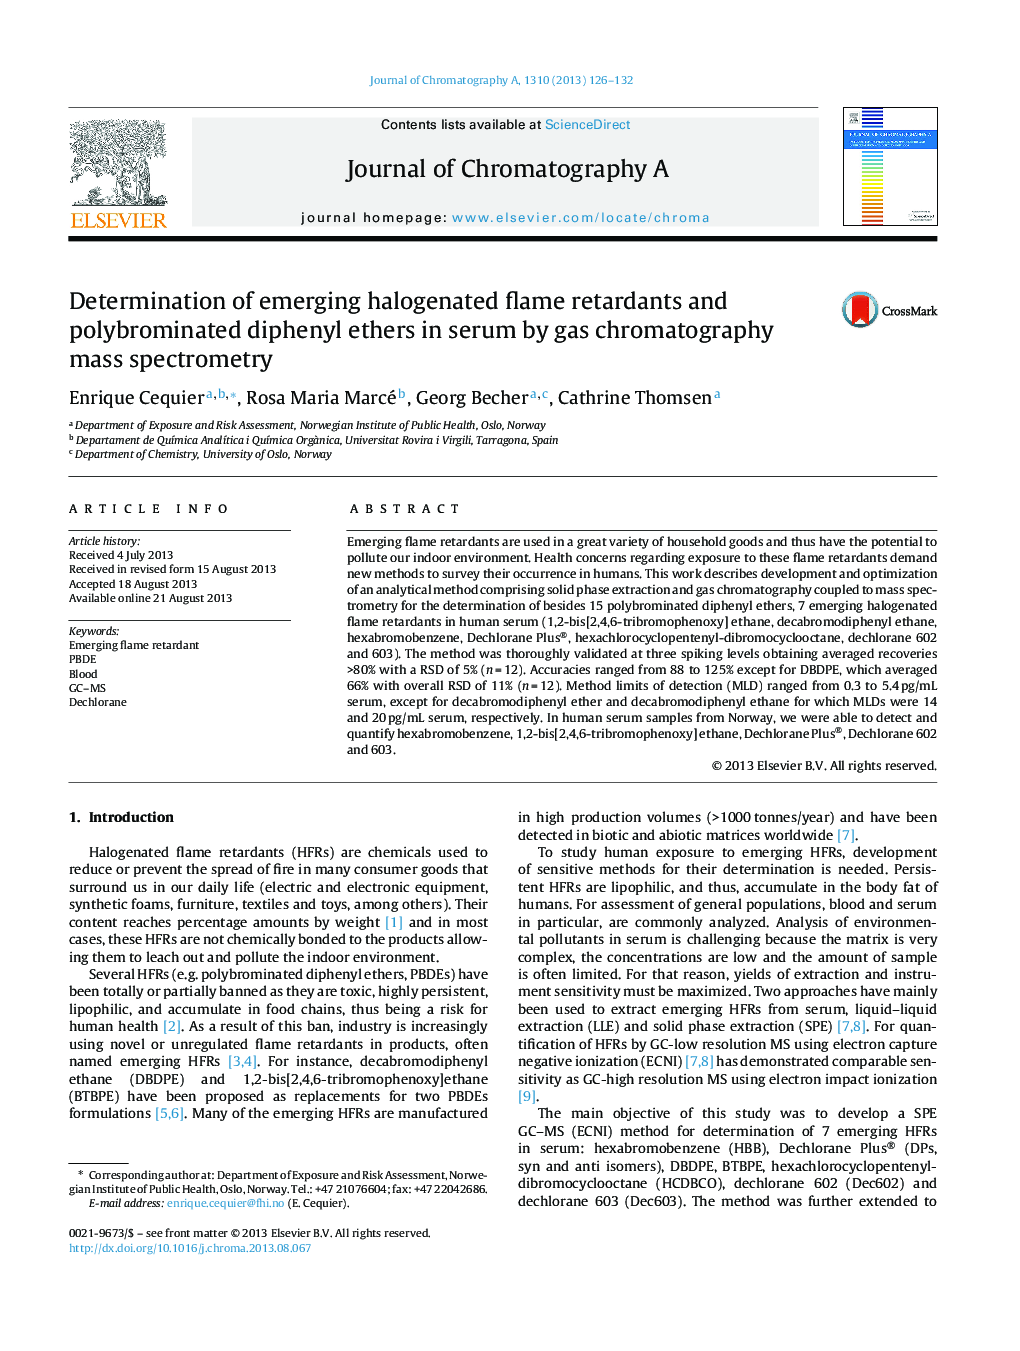 Determination of emerging halogenated flame retardants and polybrominated diphenyl ethers in serum by gas chromatography mass spectrometry